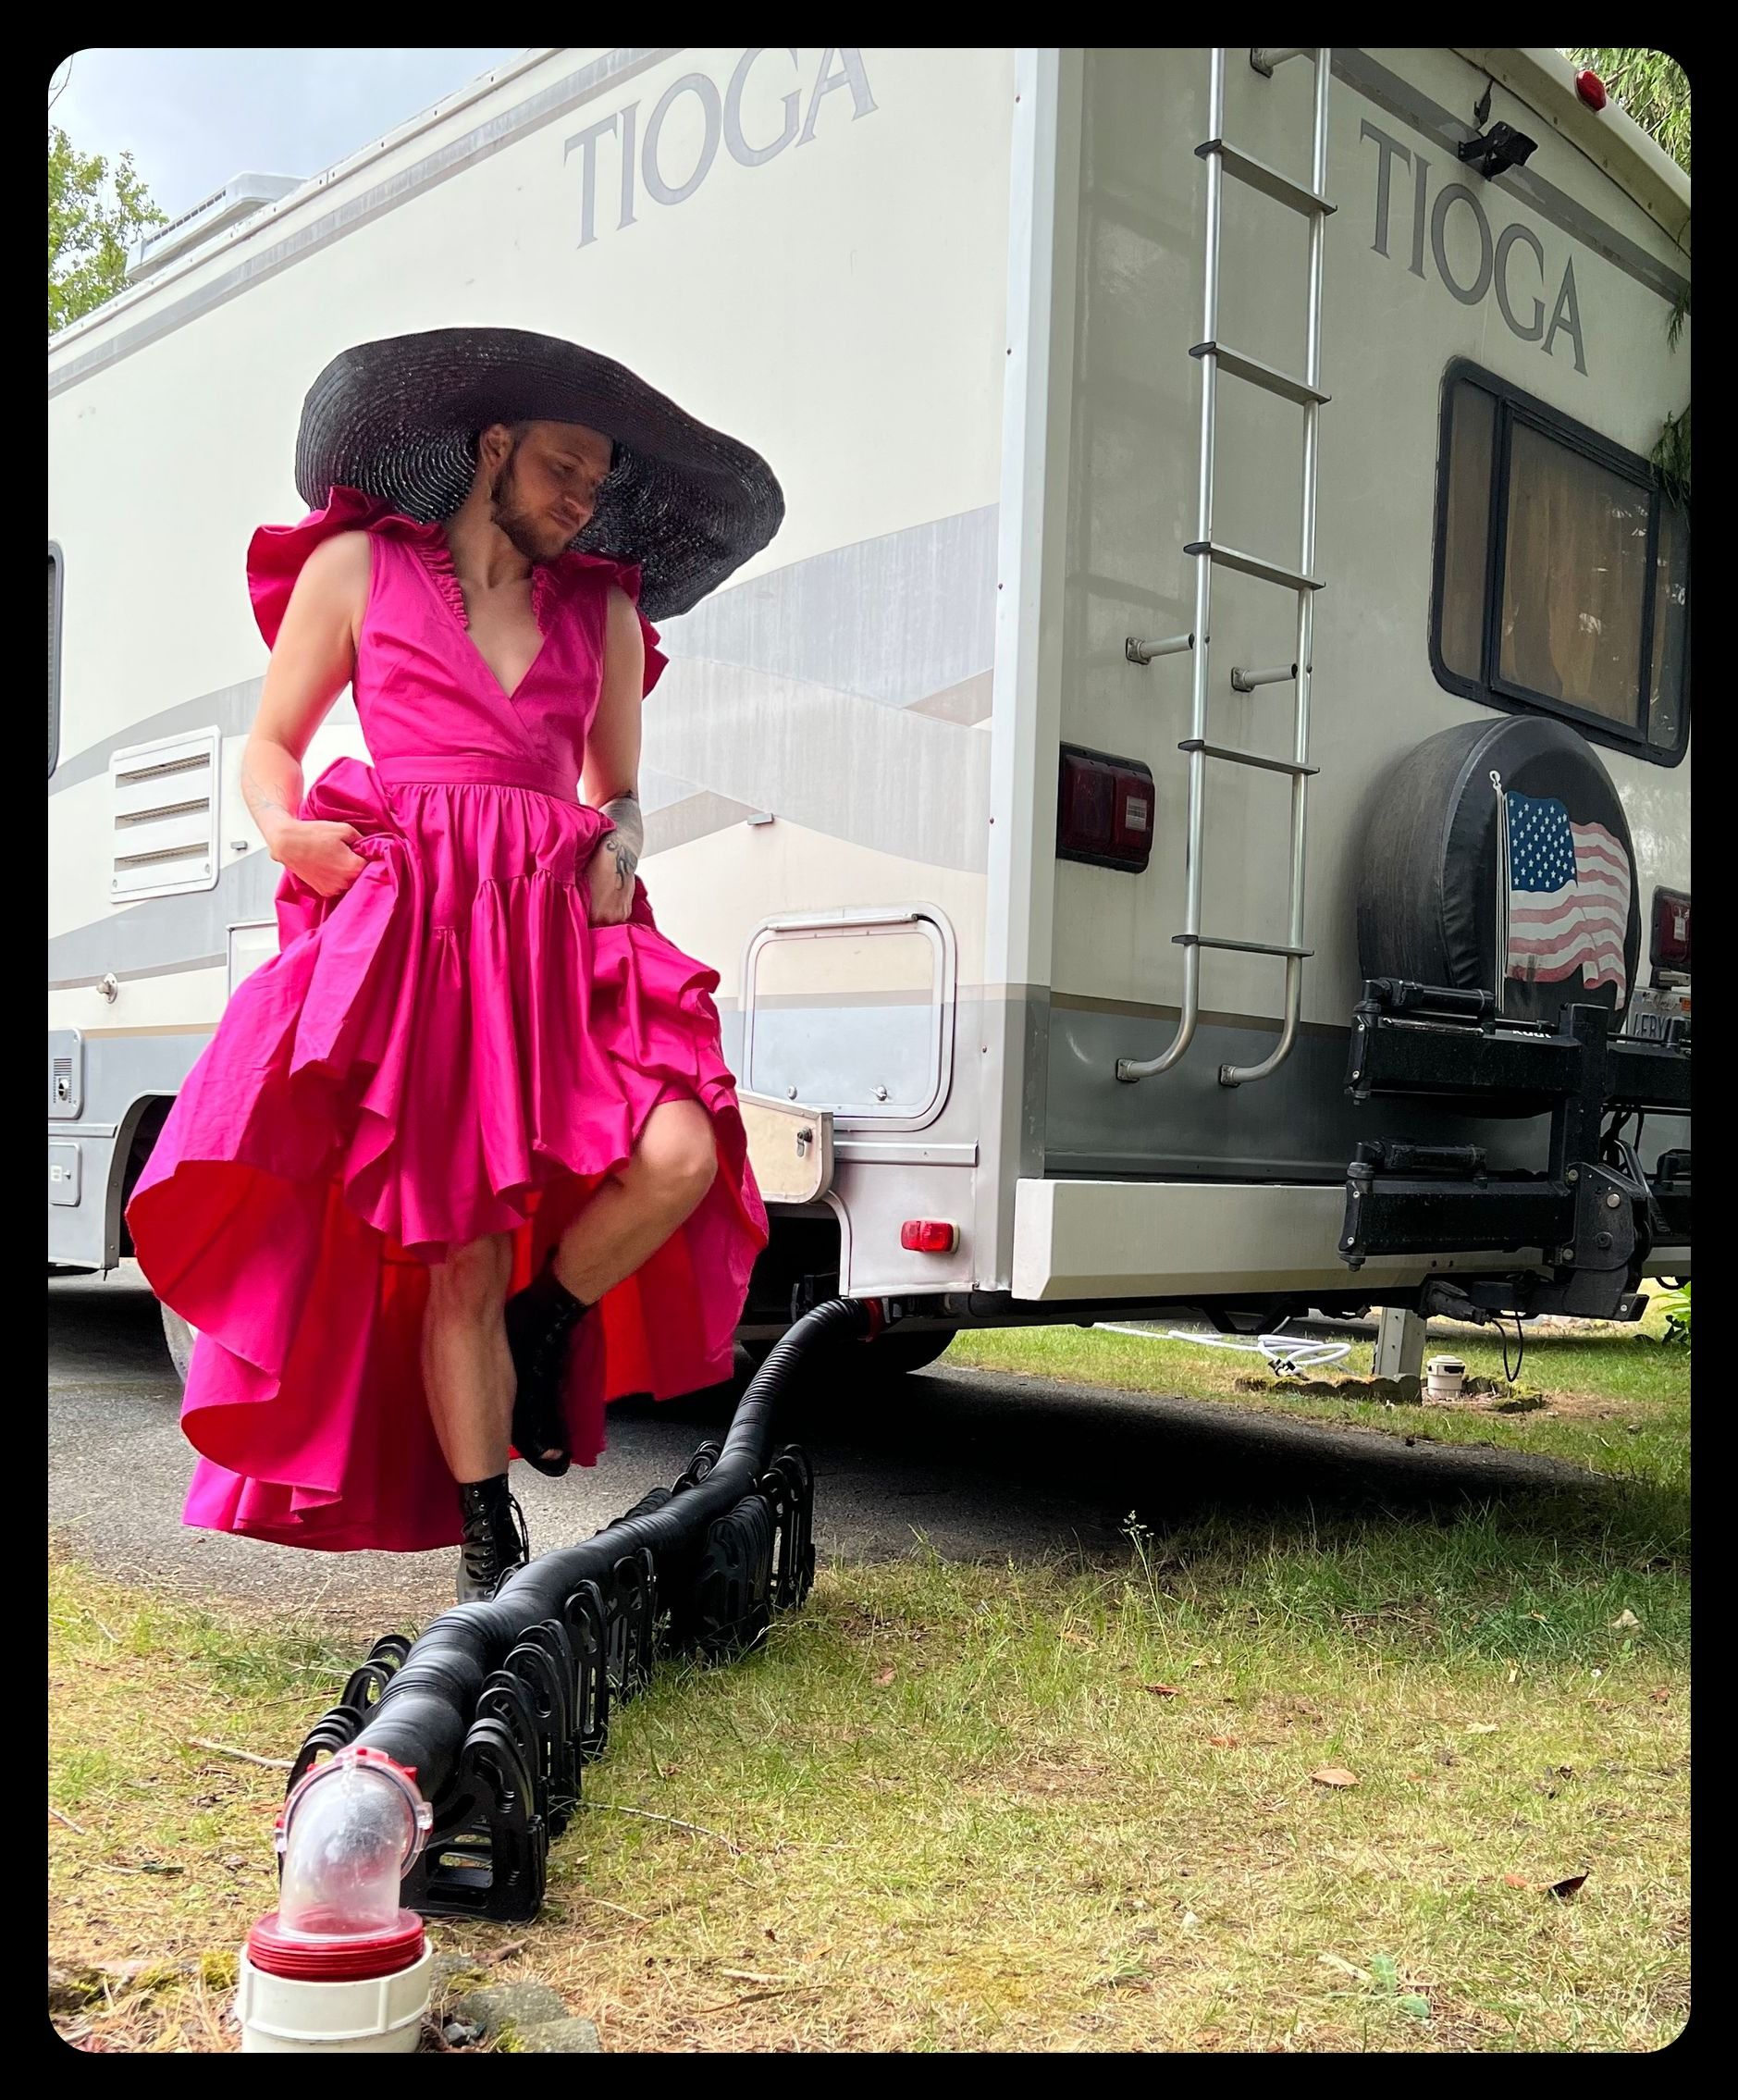 Photo: A man wearing a magenta dress with tiered ruffles and an absurdly wide black straw hat steps over a sewage hose connected to an RV at one end and a dump portal in the ground at the other.